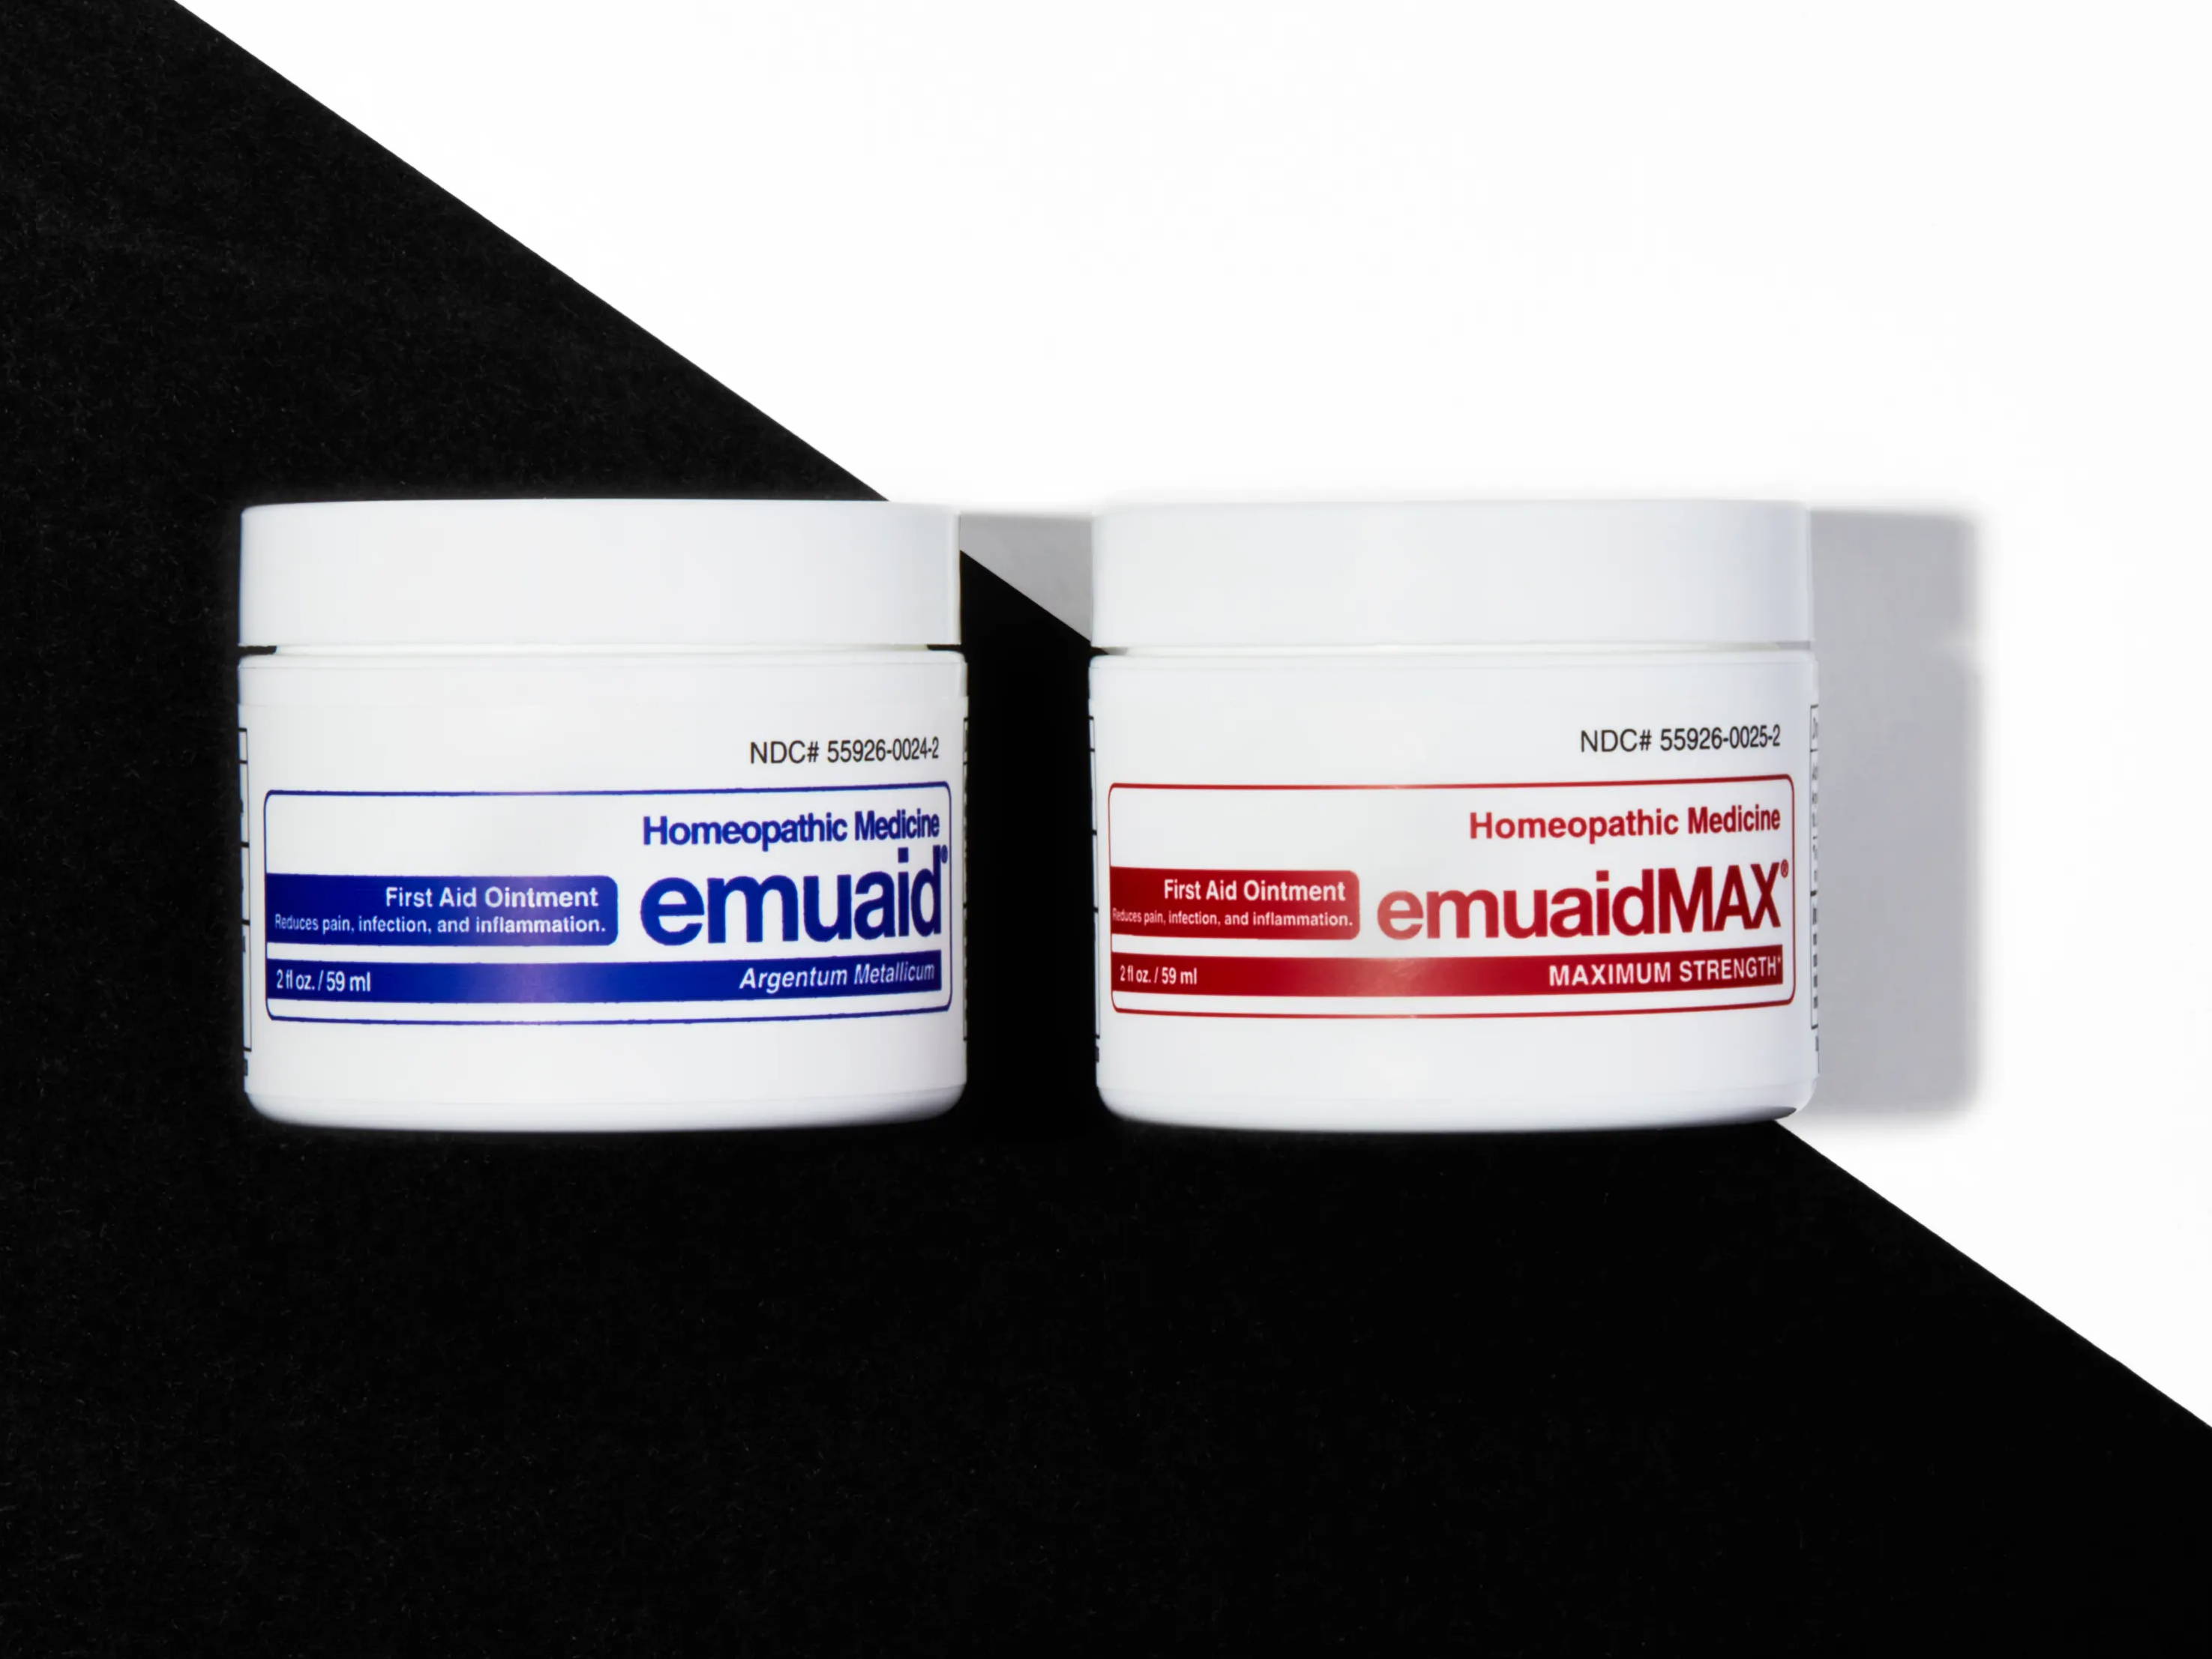 image of emauid and emuaidmax ointments